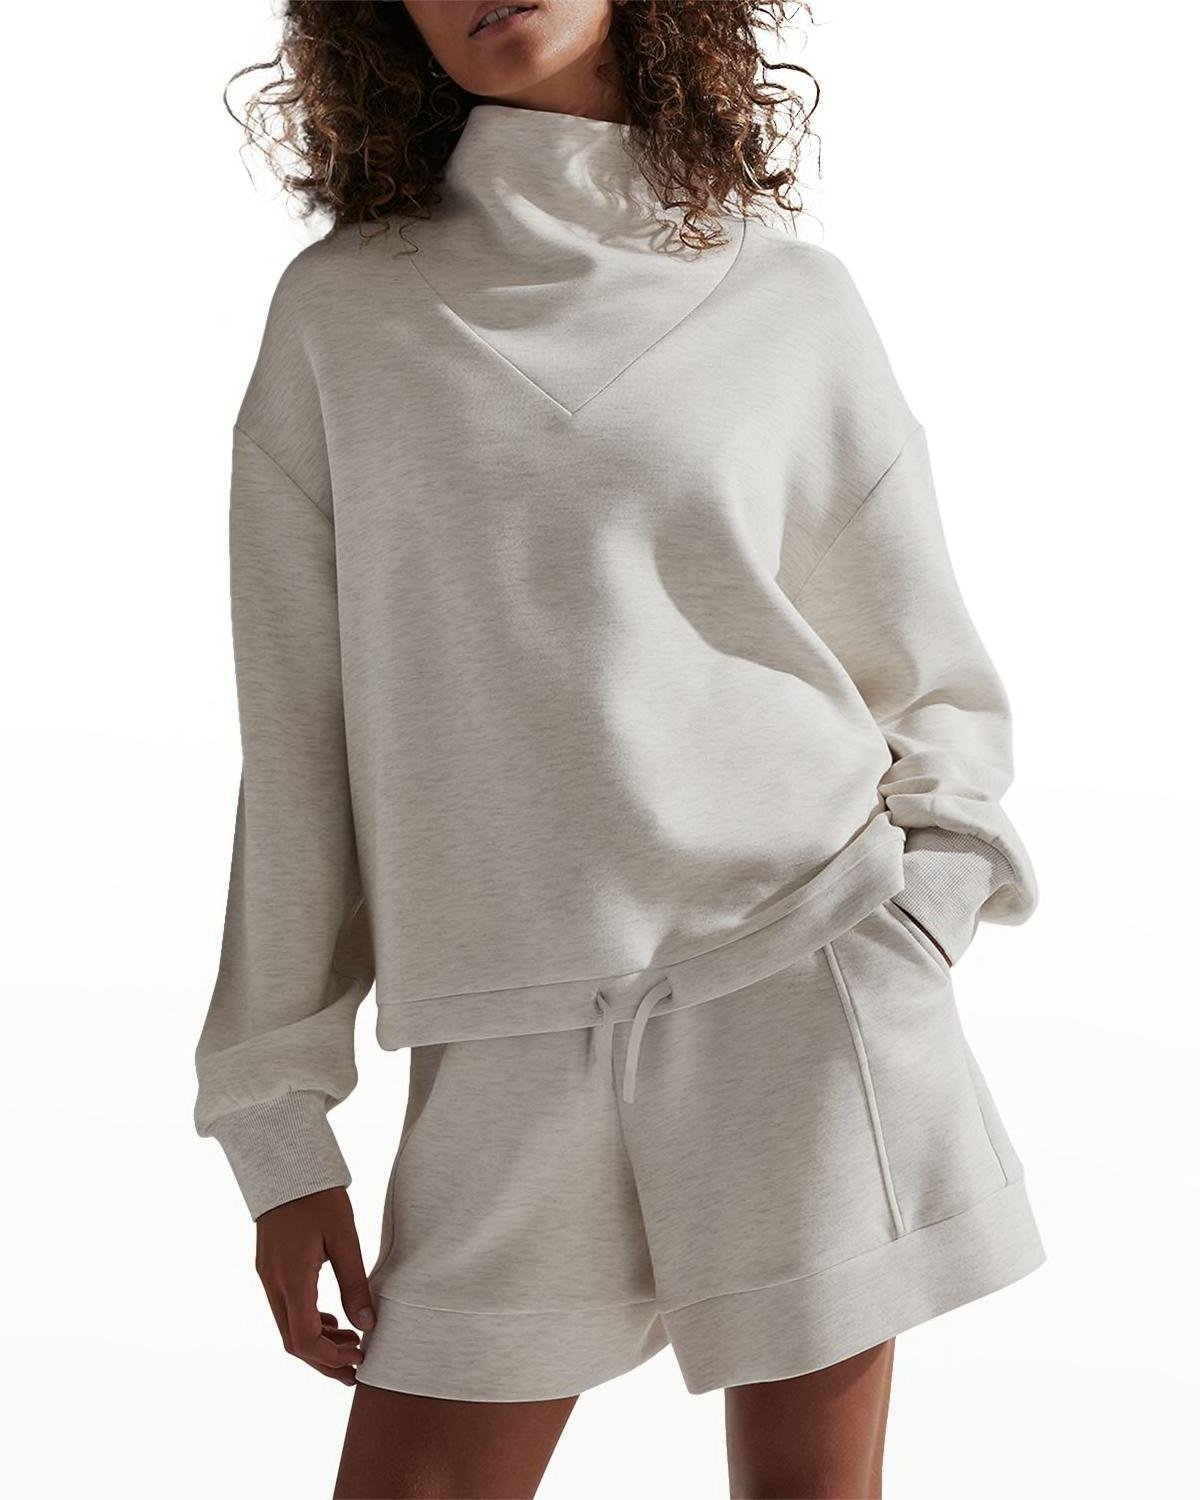 Soft Double-Face Sweats Collection by VARLEY